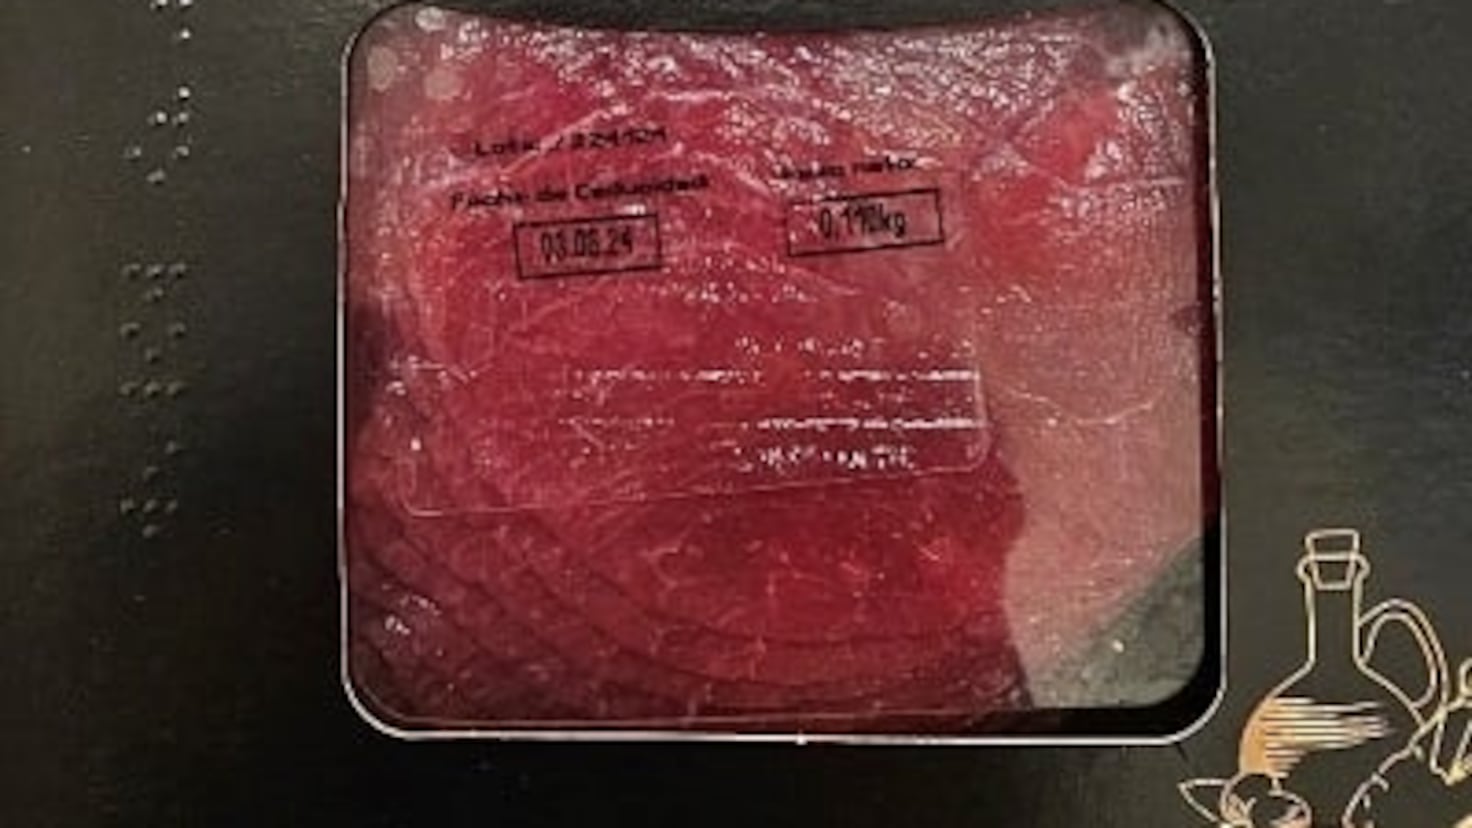 Food alert: salmonella detected in a carpaccio from Spain
